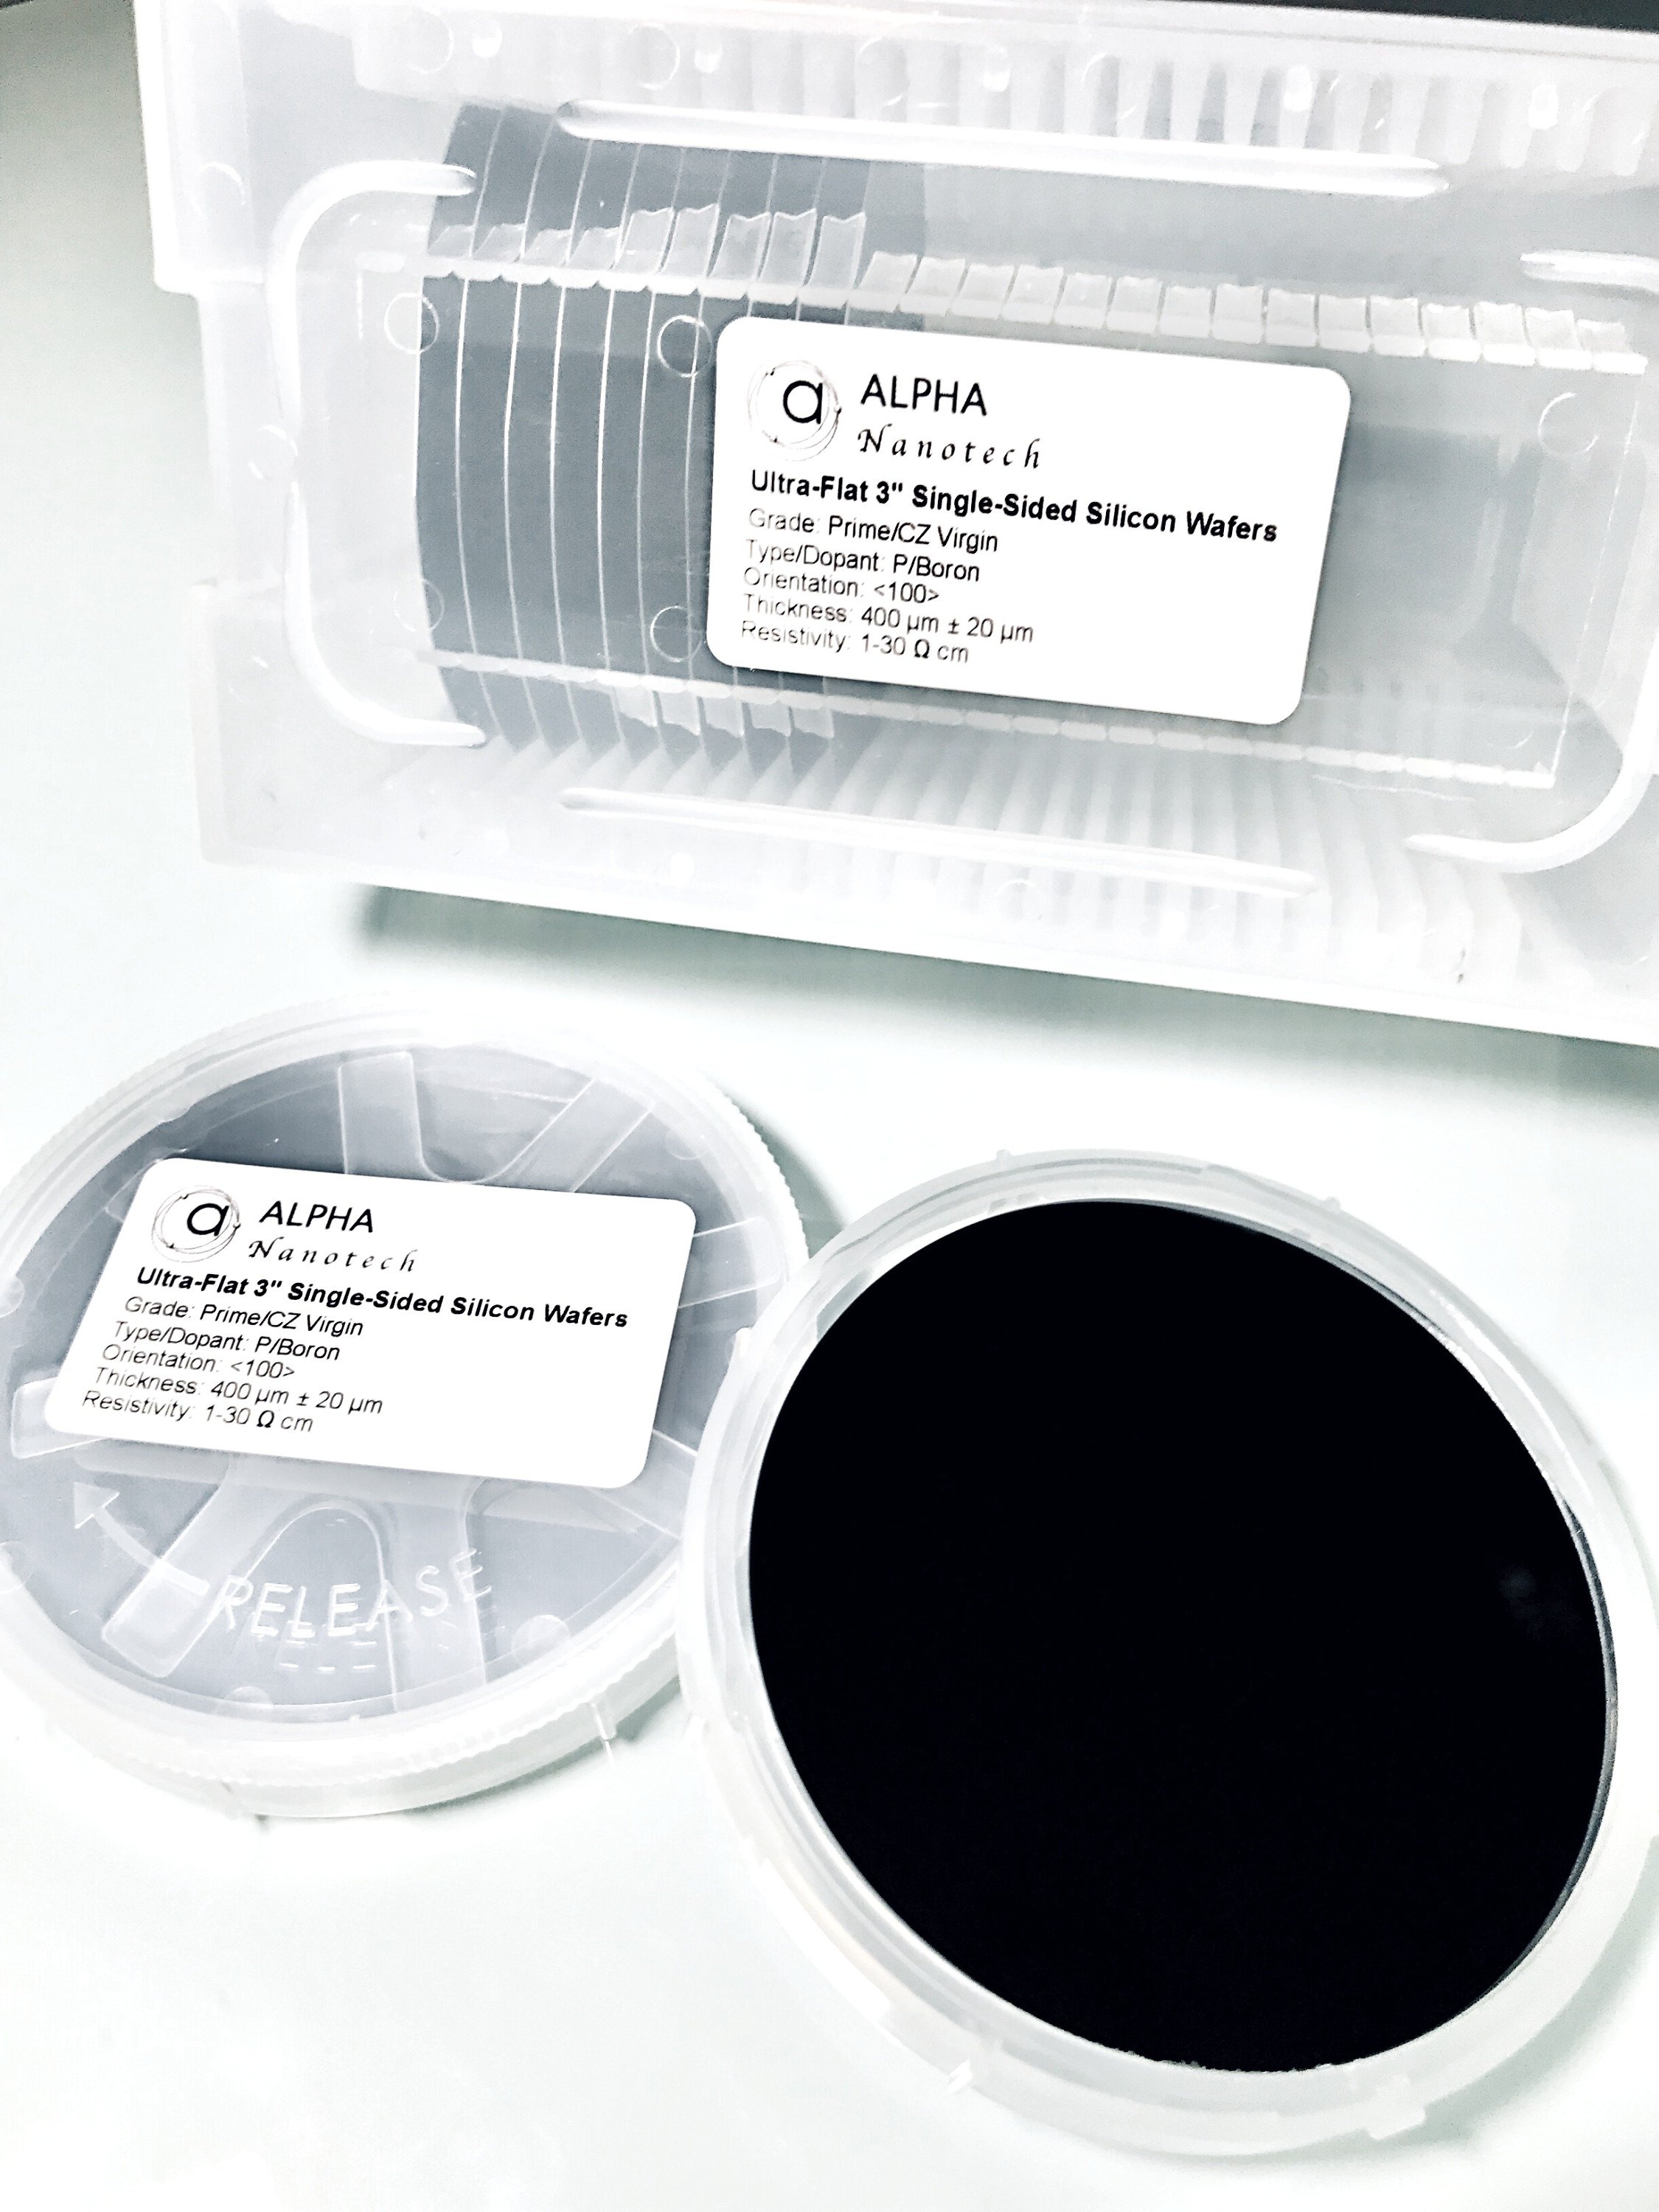 P-type Boron-doped 200nm SiO2 thermal oxide wafer